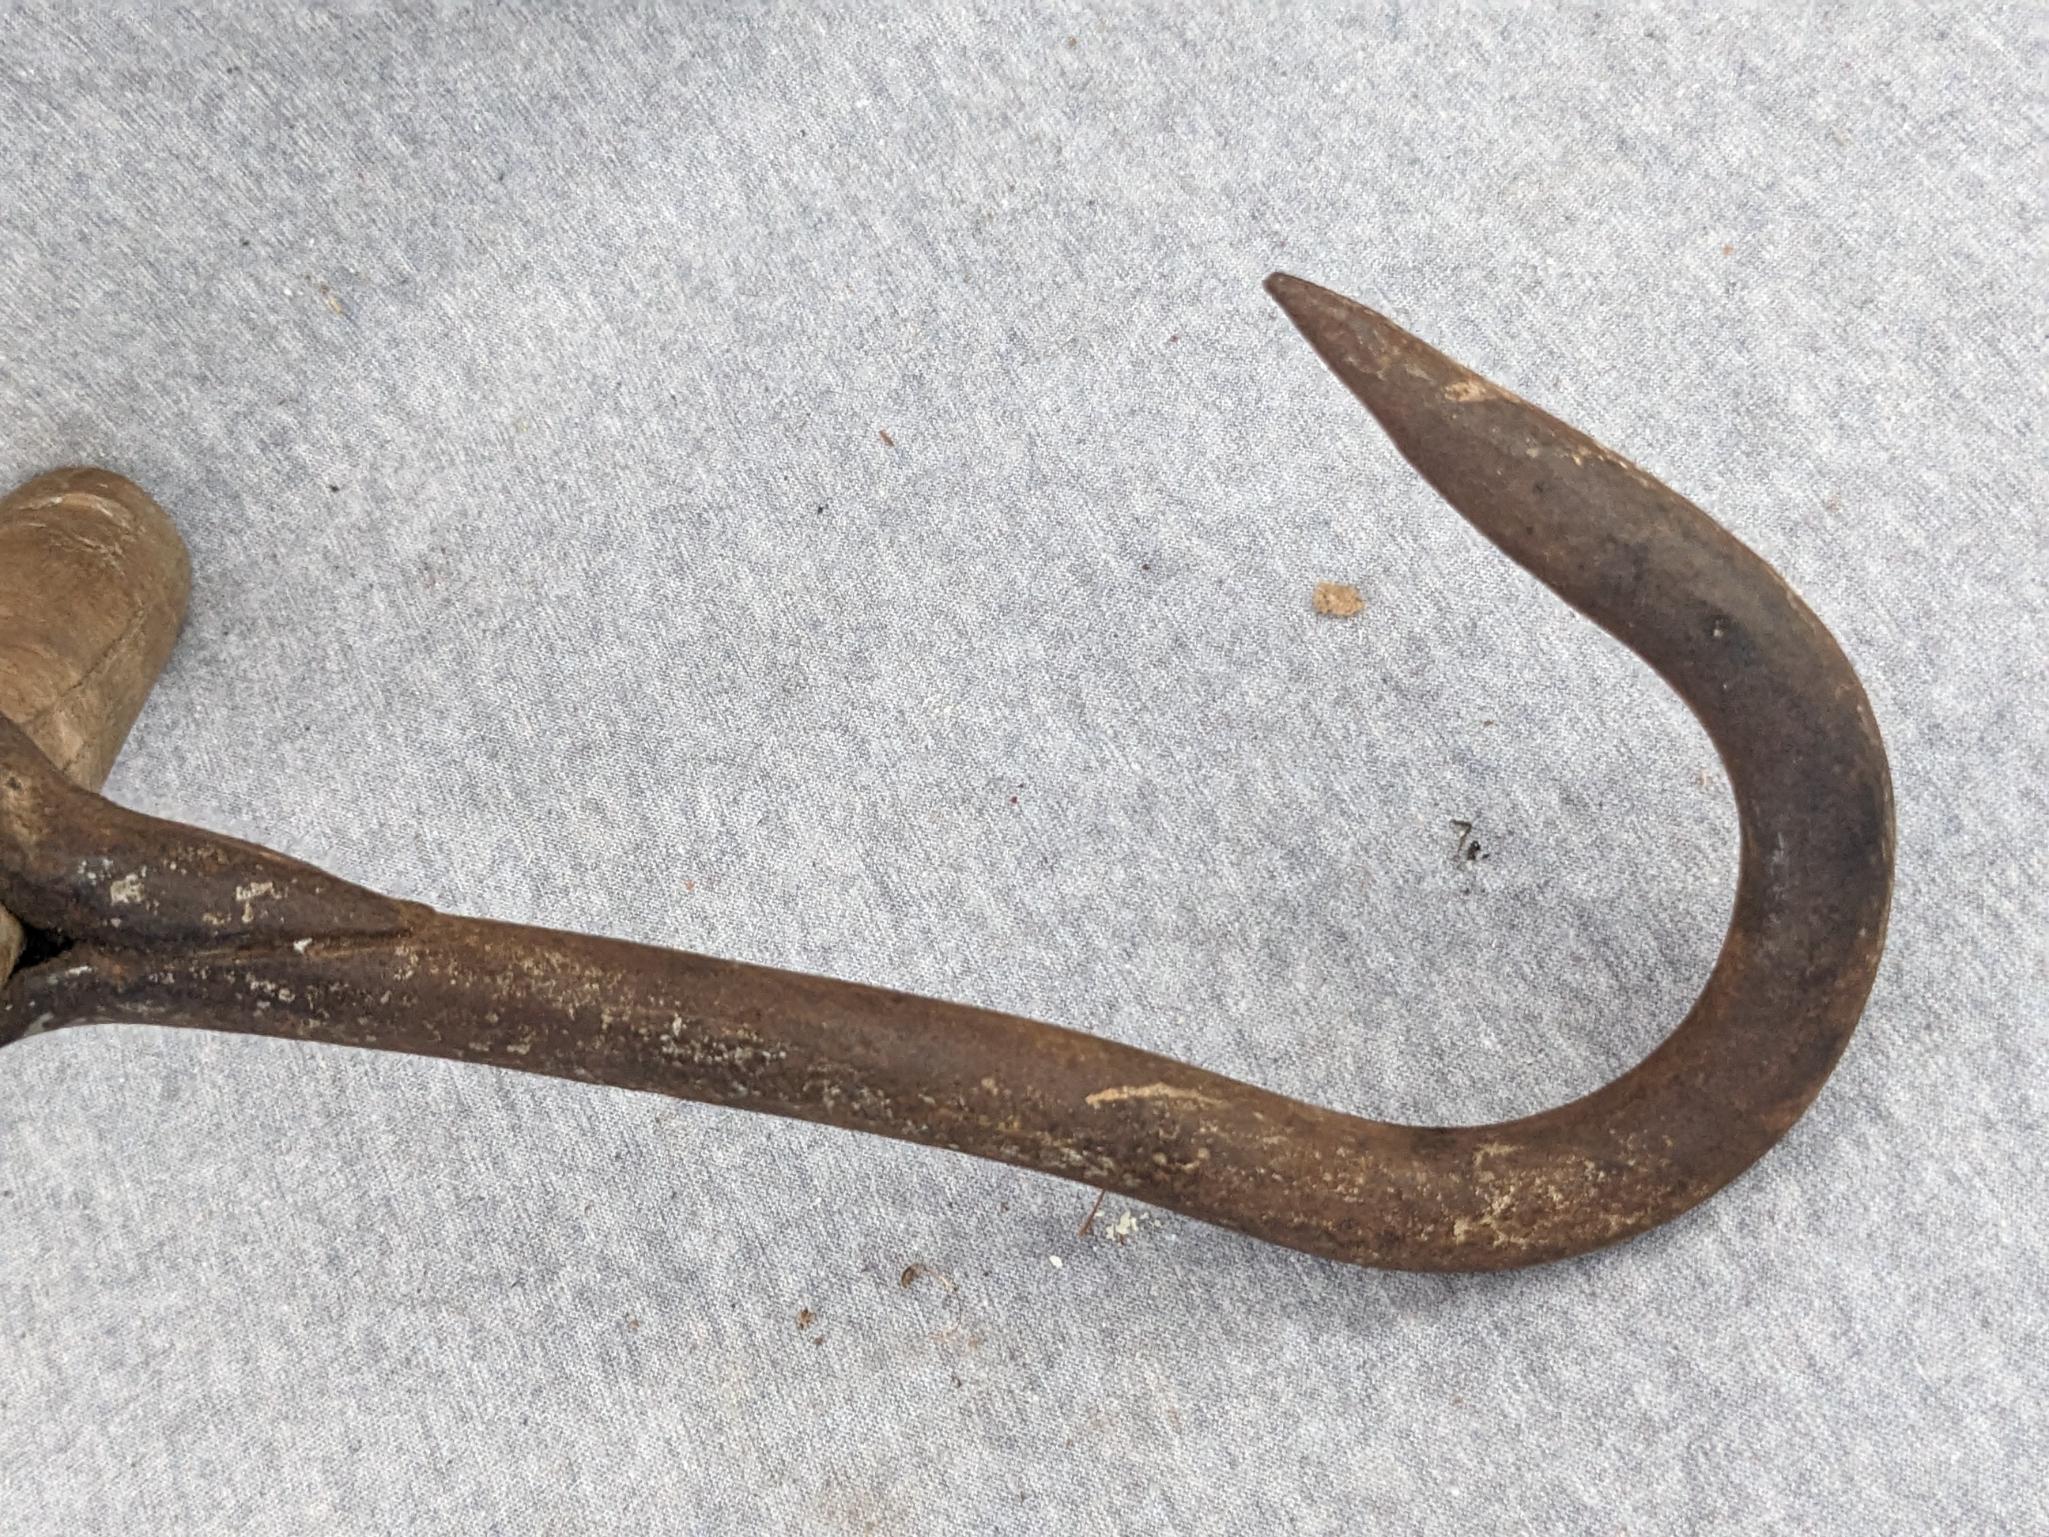 Hand-forged hay hook on 11 wooden handle. Would